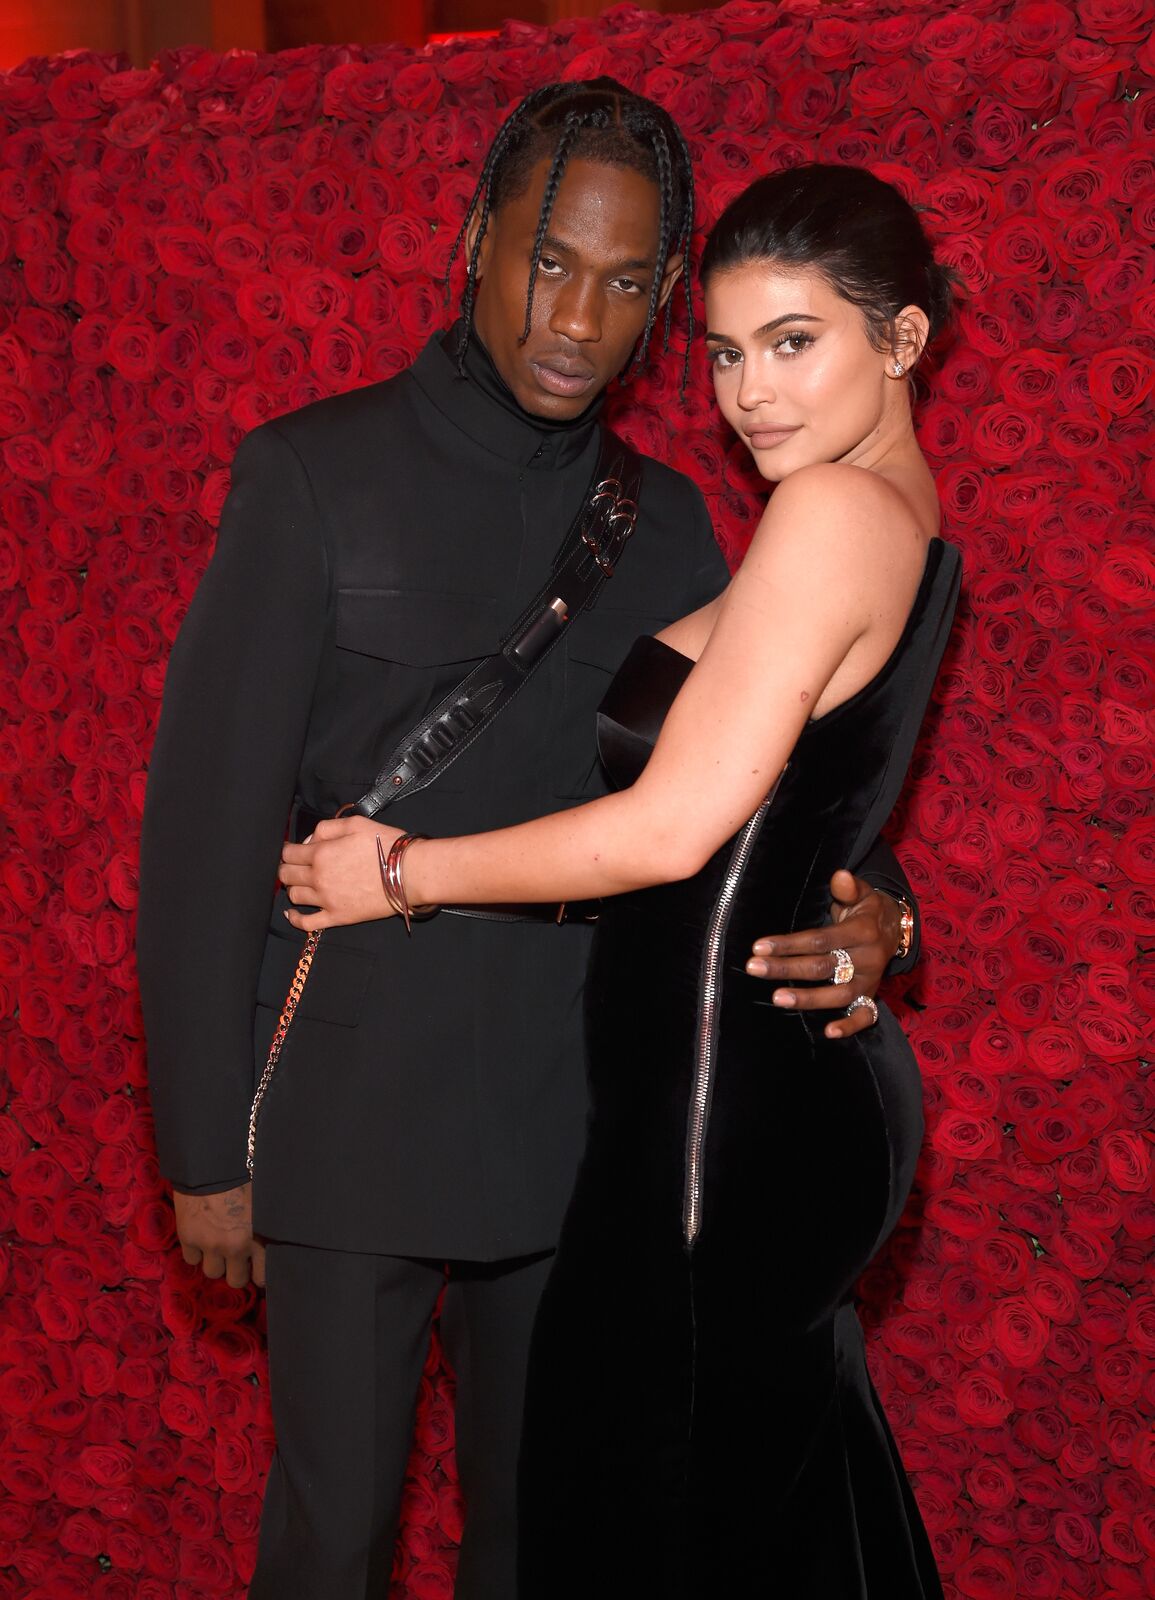 Travis Scott and Kylie Jenner at the Heavenly Bodies: Fashion & The Catholic Imagination Costume Institute Gala at The Metropolitan Museum of Art on May 7, 2018. | Source: Getty Images